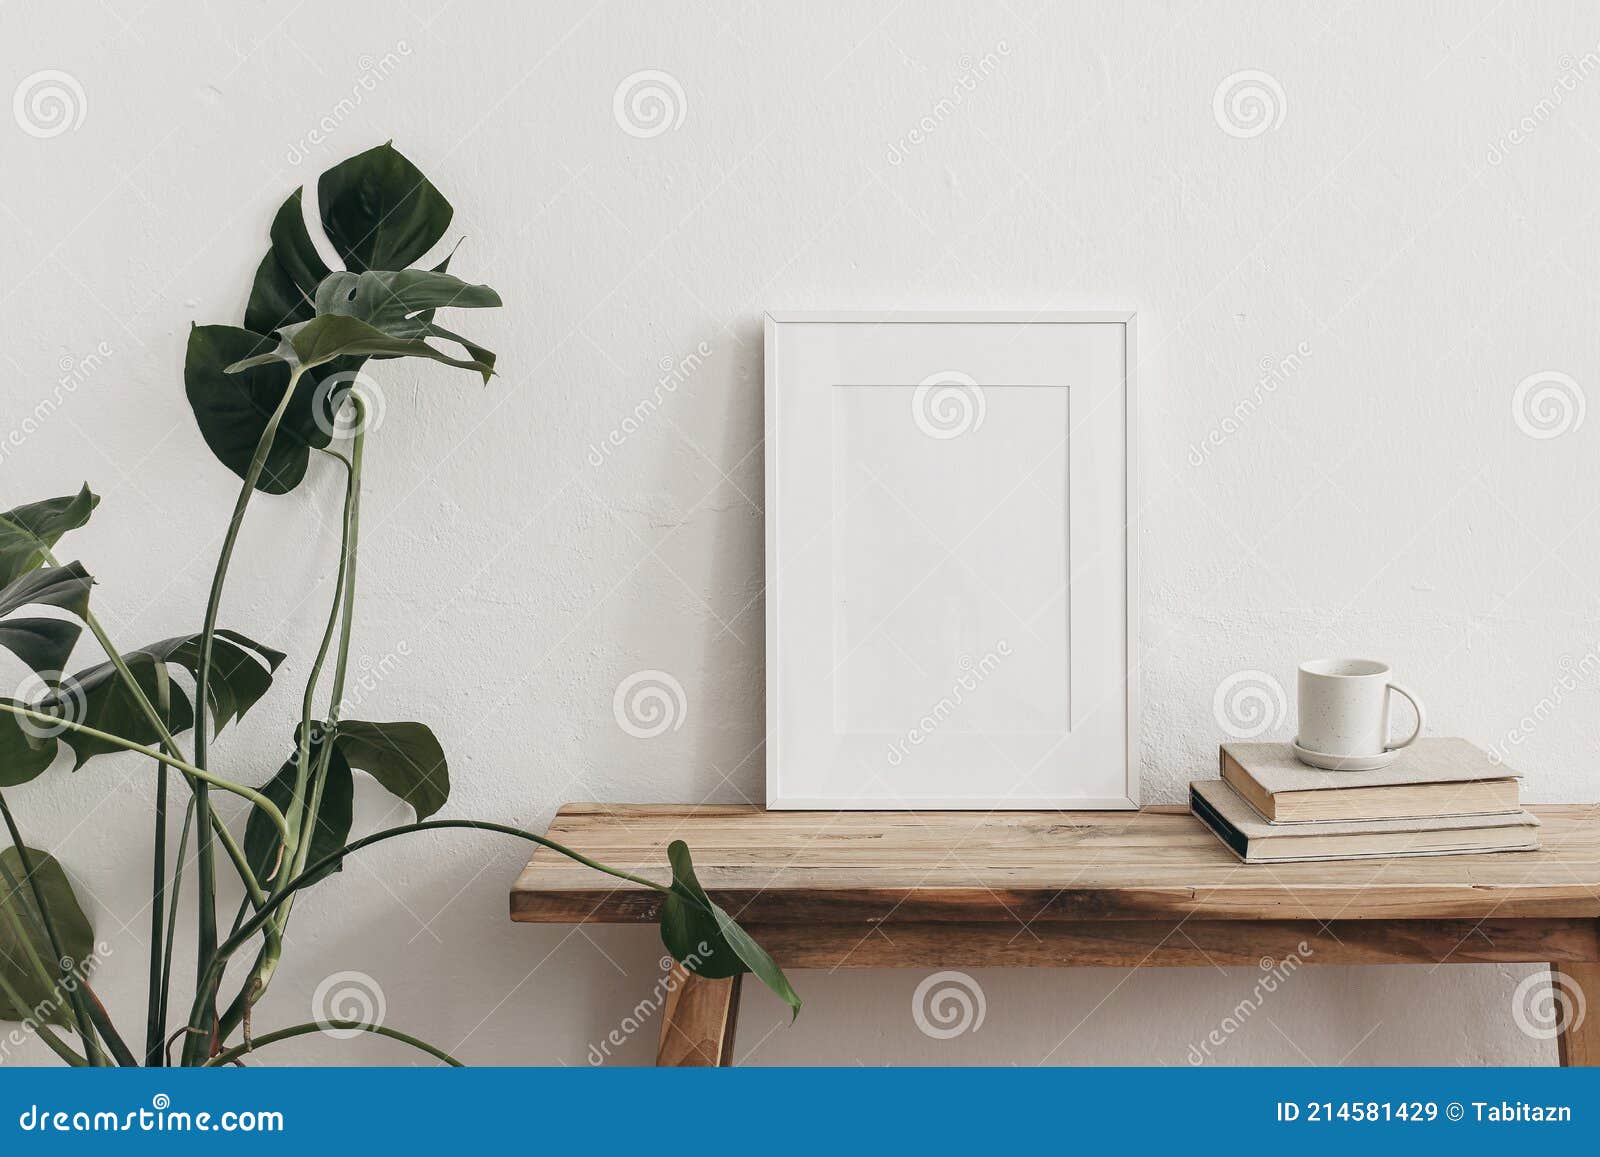 white portrait frame mockups on vintage bench, table. cup of coffee on pile of books and monstera potted plant. white